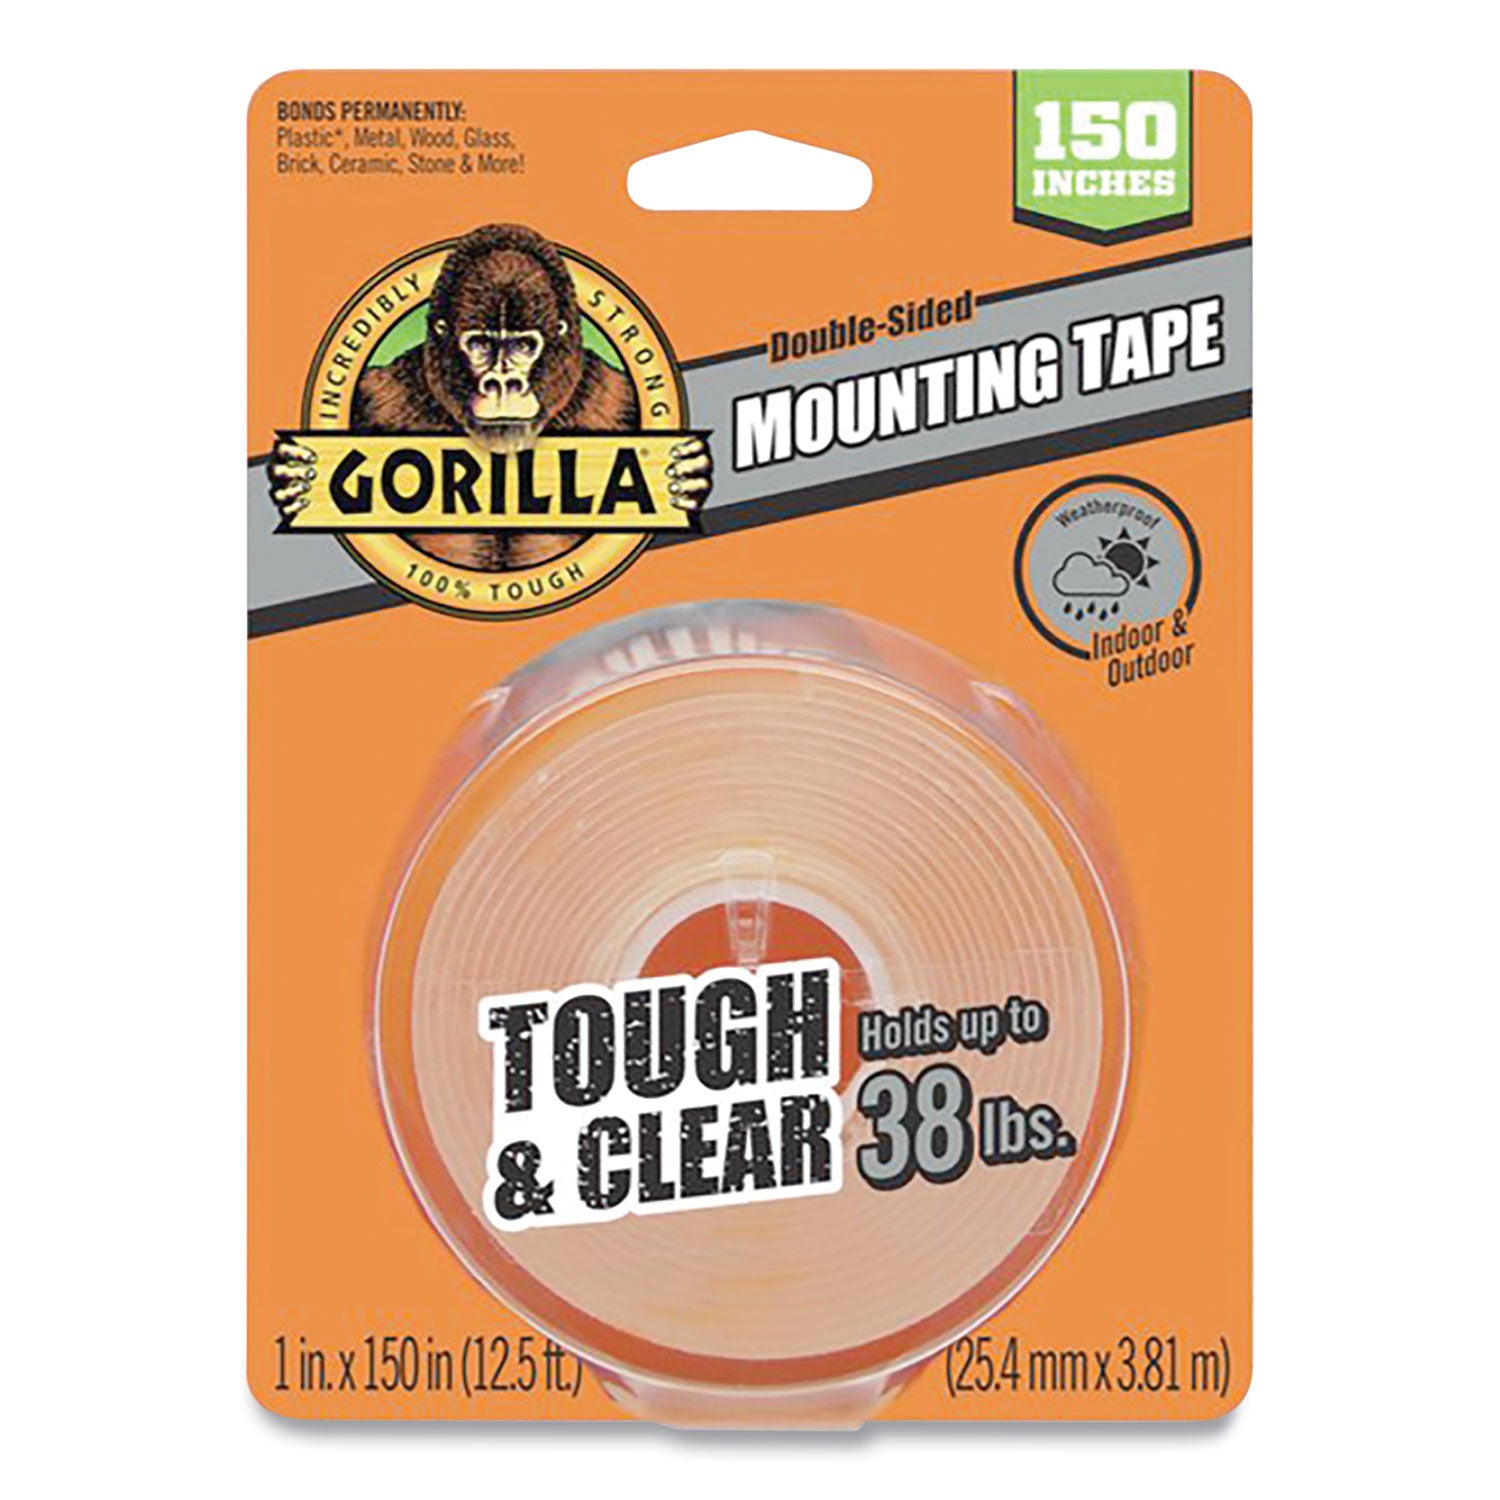 tough-&-clear-double-sided-mounting-tape-permanent-holds-up-to-025-lb-per-inch-1-x-125-ft-clear_gor6036002 - 1